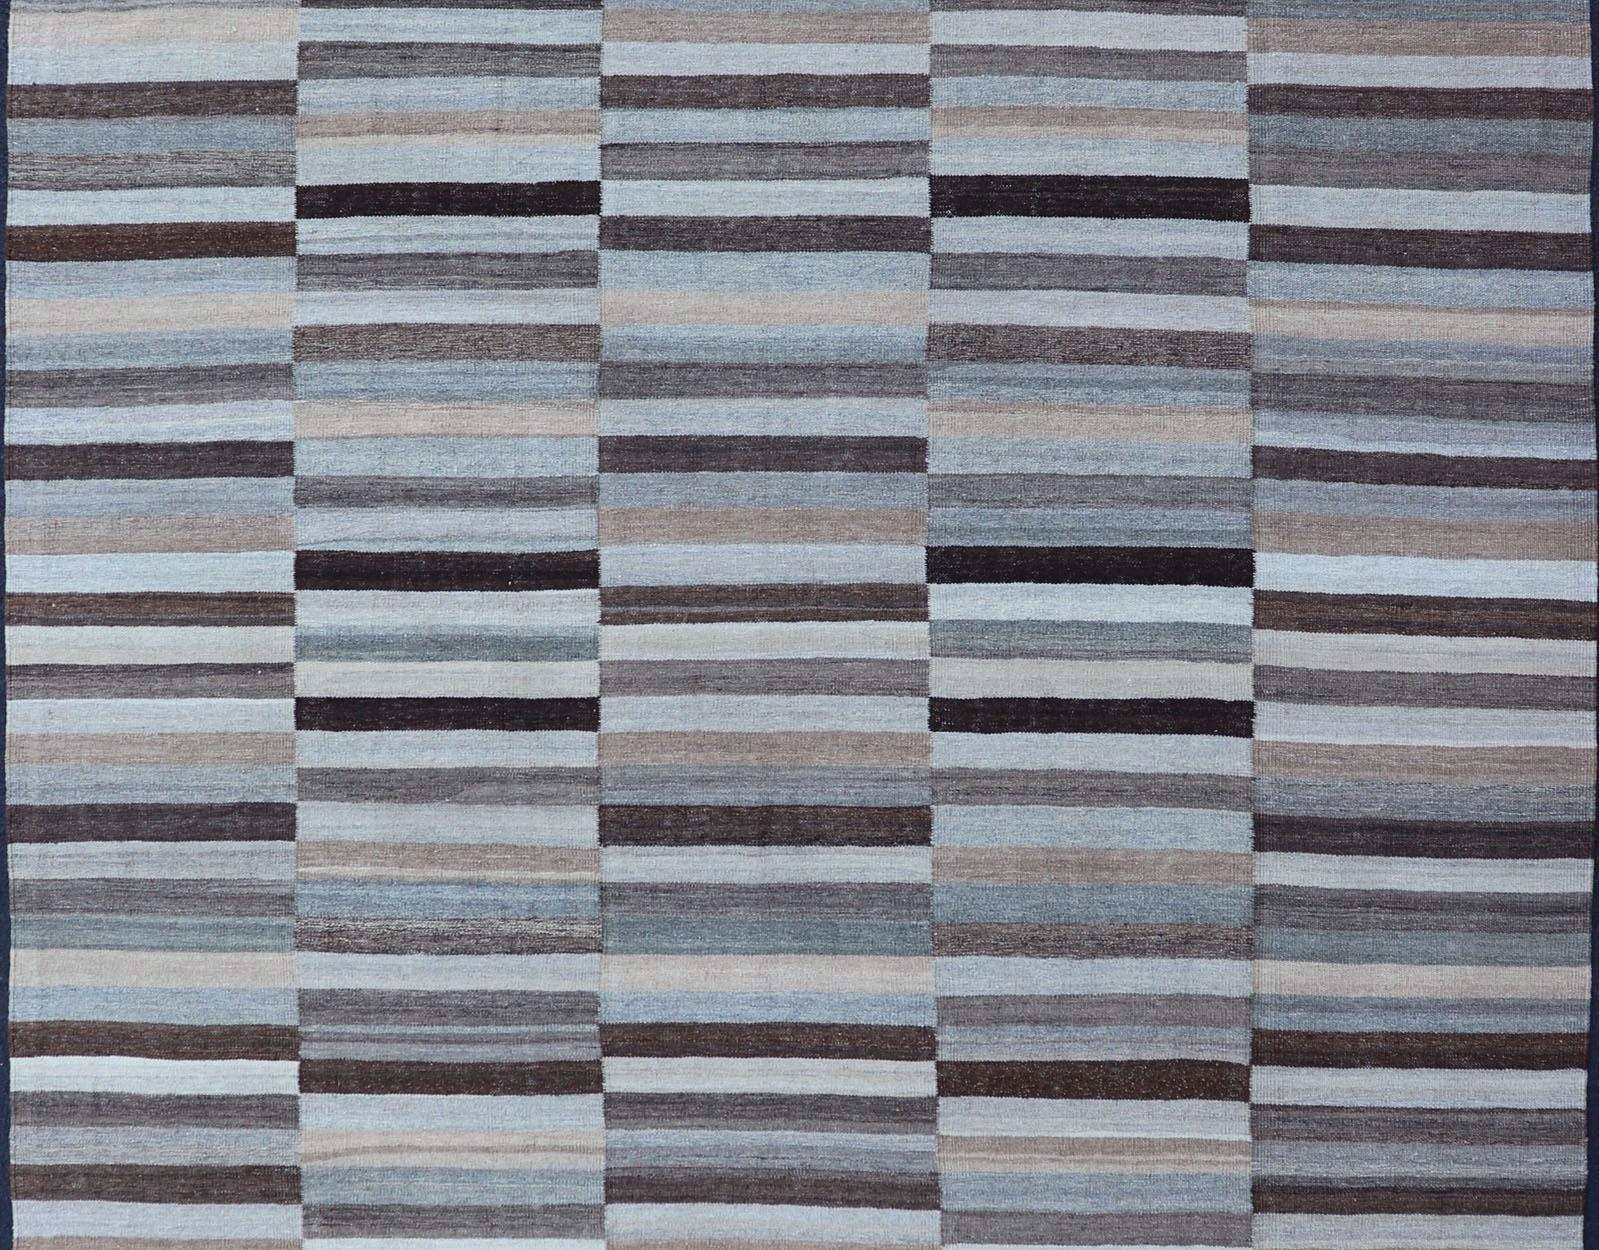 Hand-Woven Modern Flat-Weave Kilim Rug in Multi-Panel Striped Design in Earthy Tones For Sale